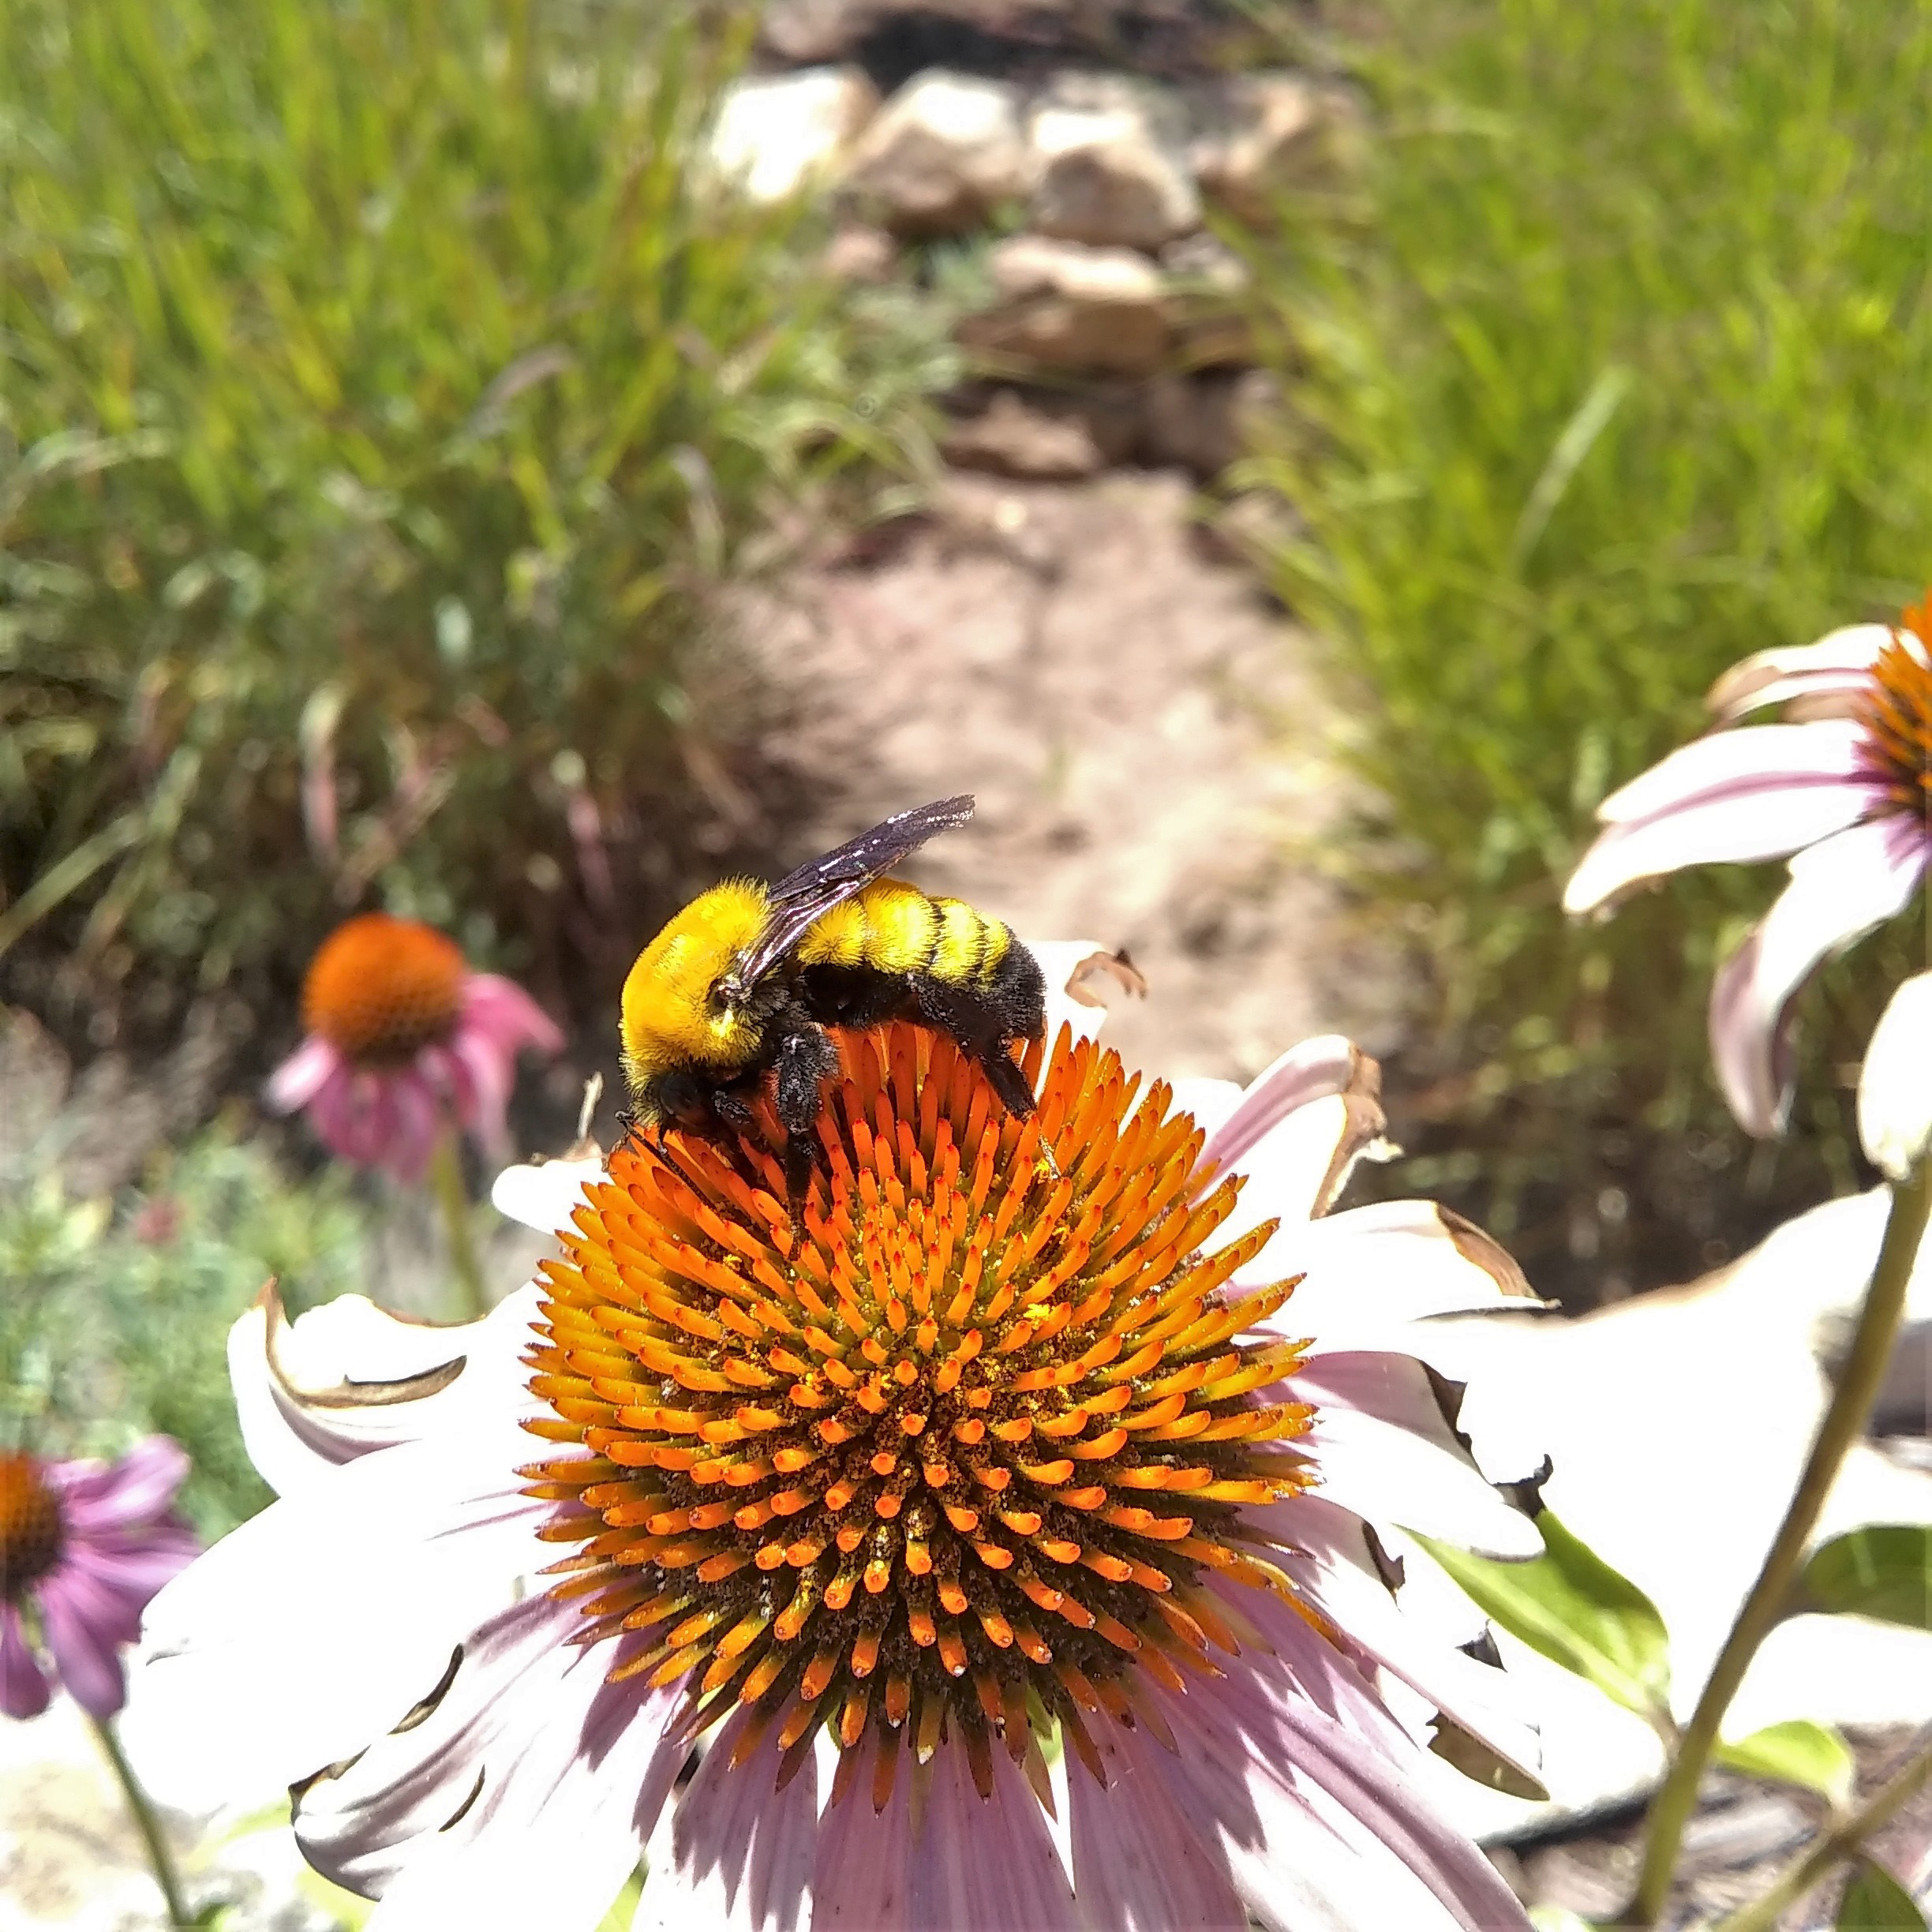 A large hairy yellow-and-black bumble bee drinks nectar from a purple coneflower.